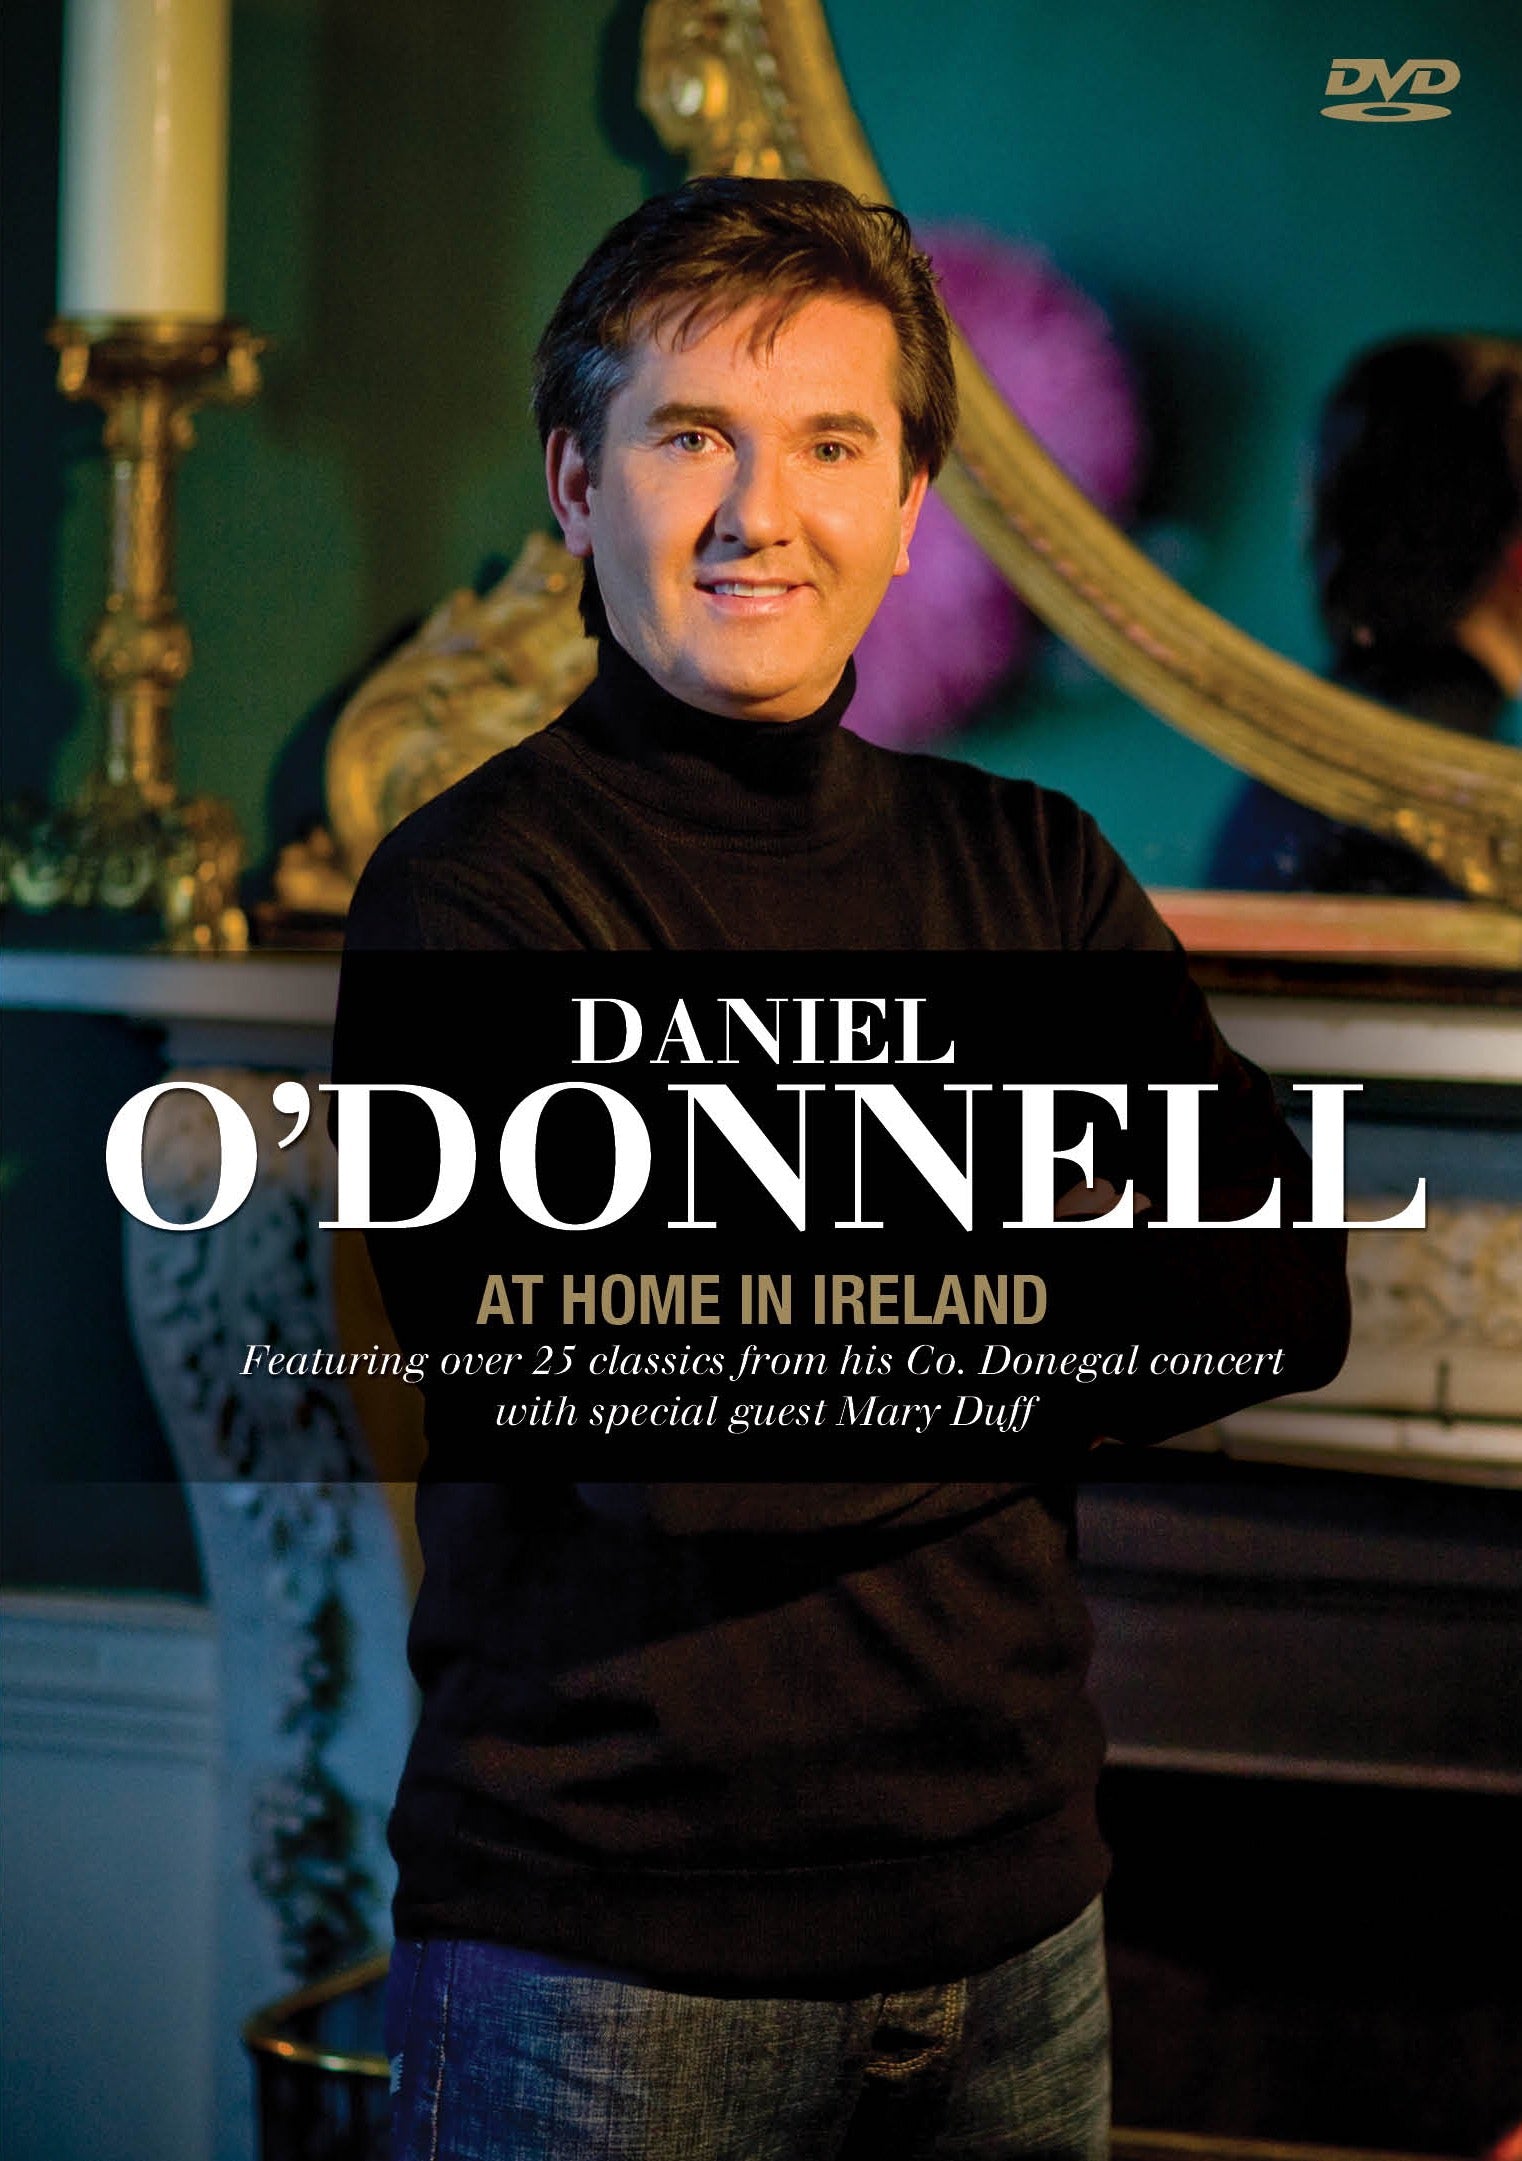 DANIEL O'DONNELL - AT HOME IN IRELAND (DVD)